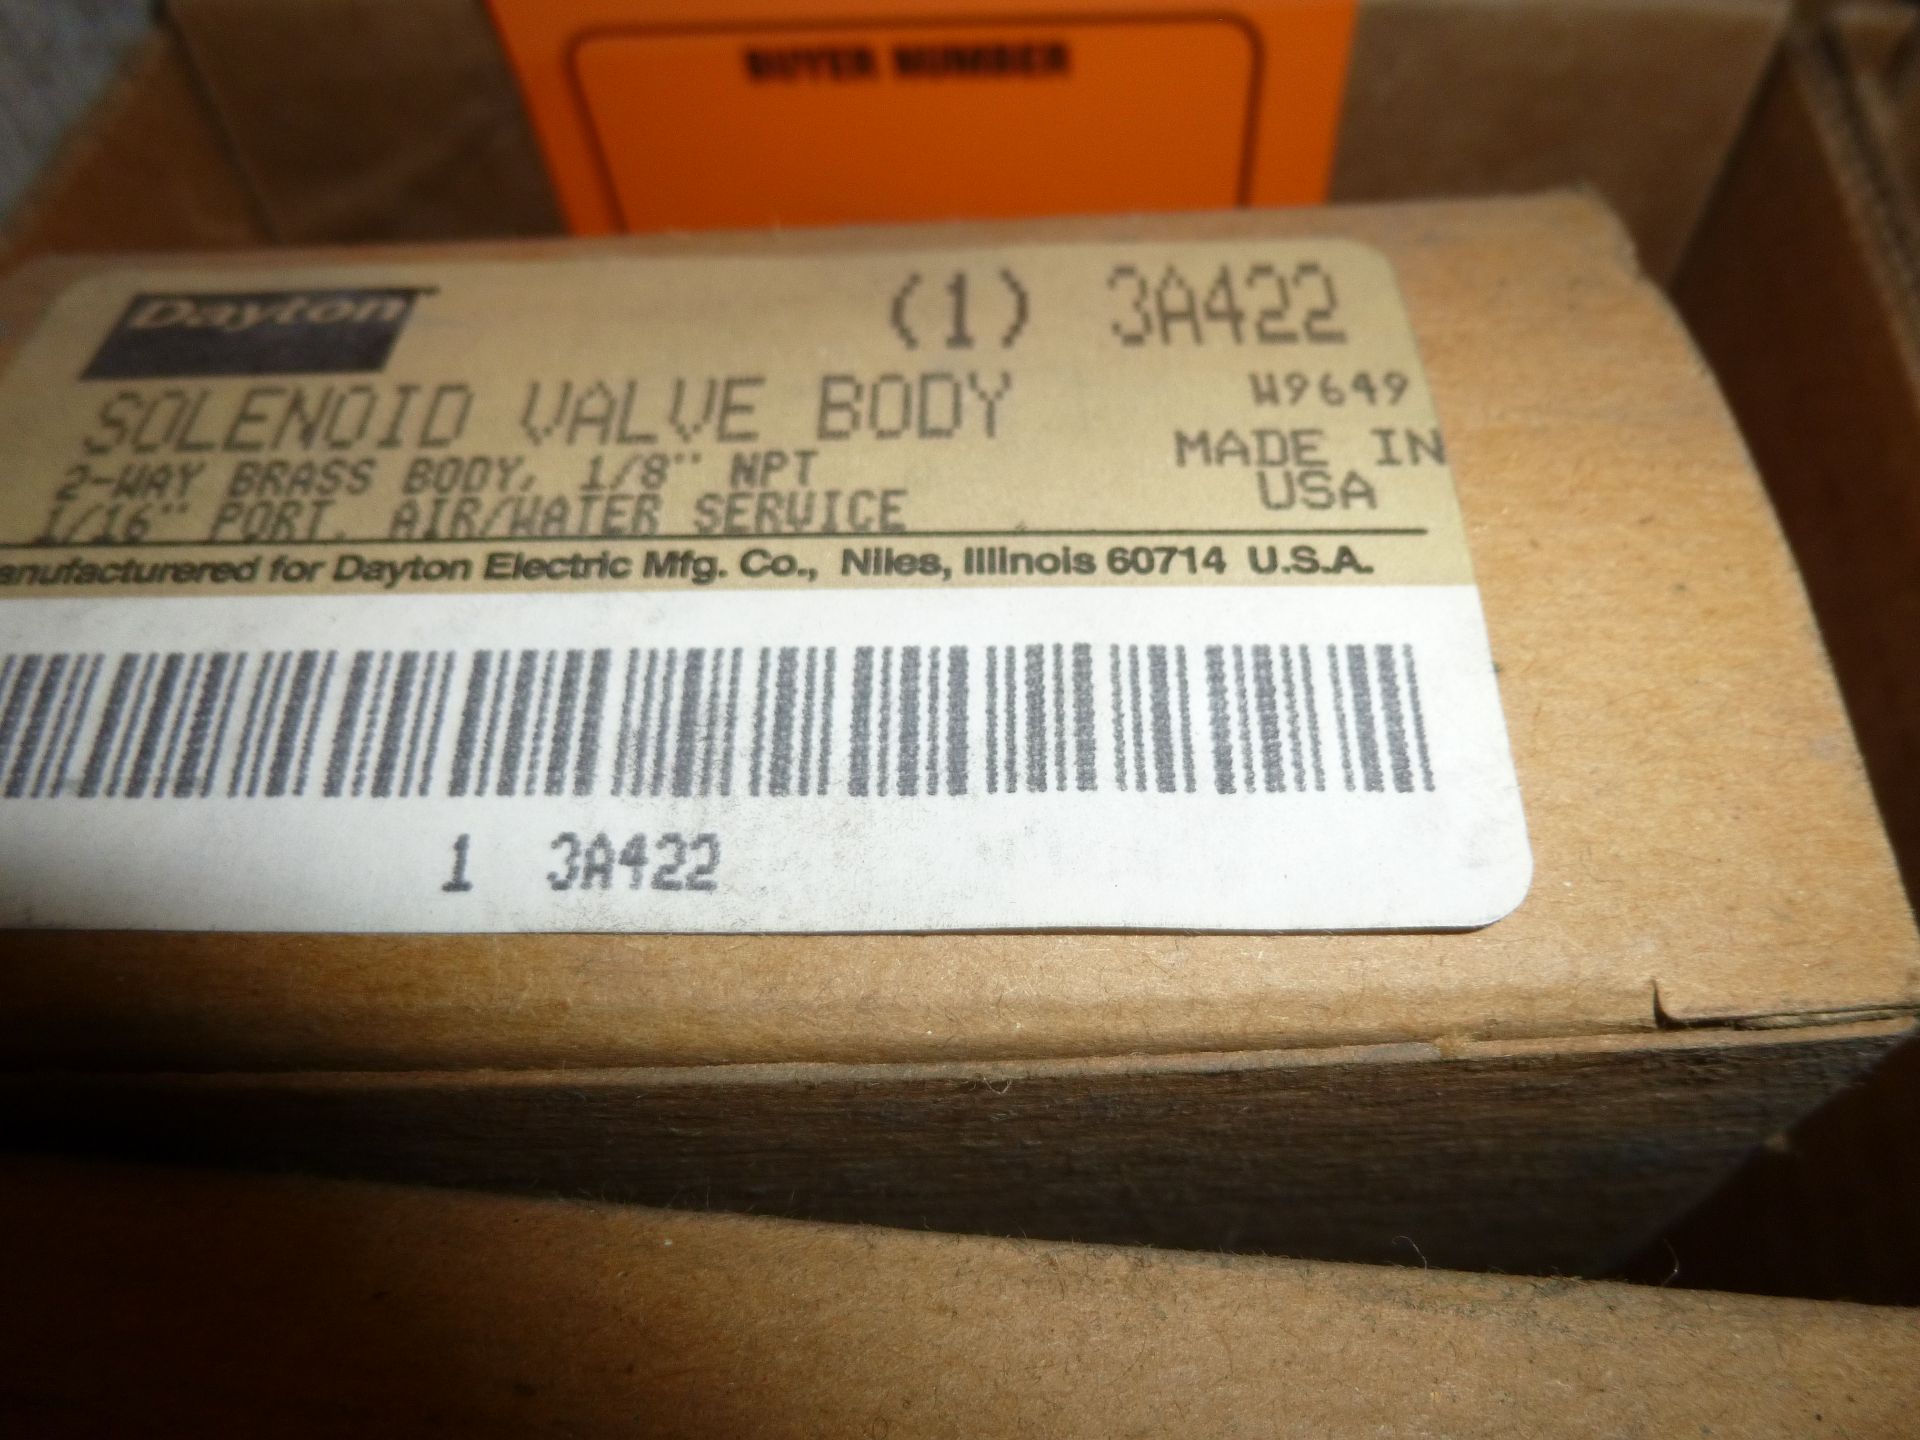 Qty 4 Dayton Solenoid valve body model 3A422, new in boxes, as always with Brolyn LLC auctions, - Image 2 of 2